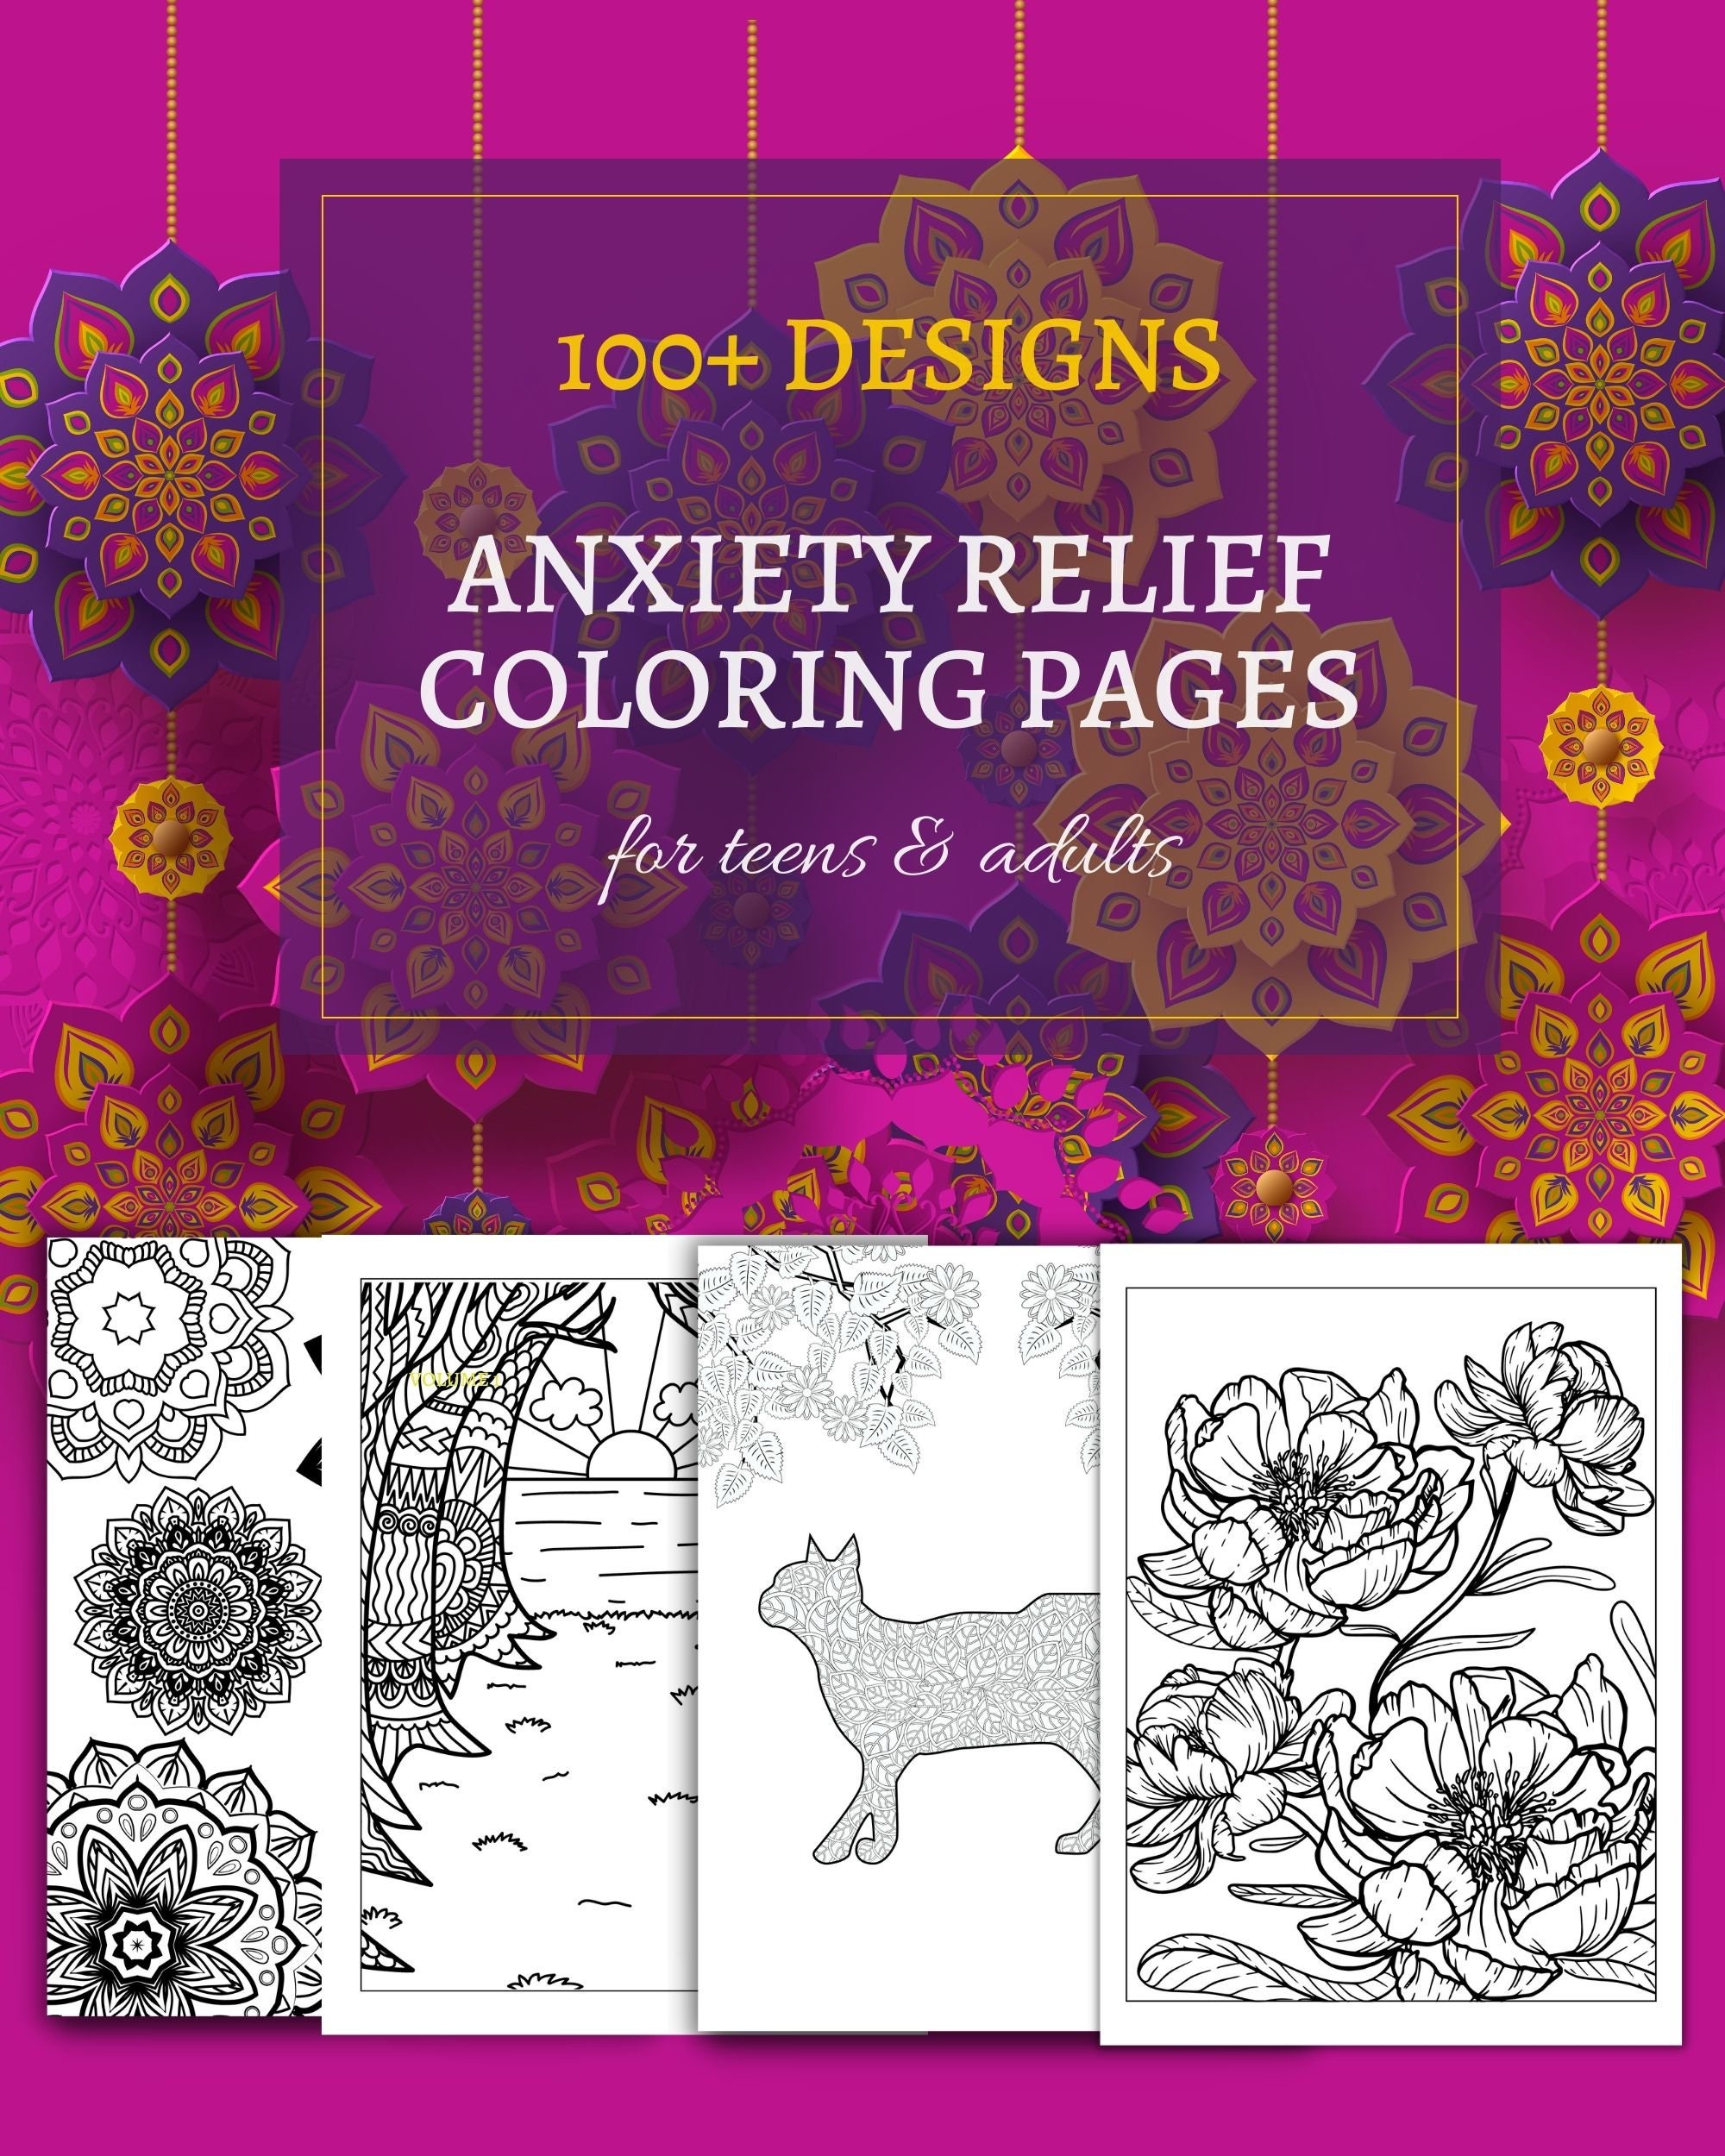 Anxiety Relief Coloring Book for Adults Graphic by ETDSGN